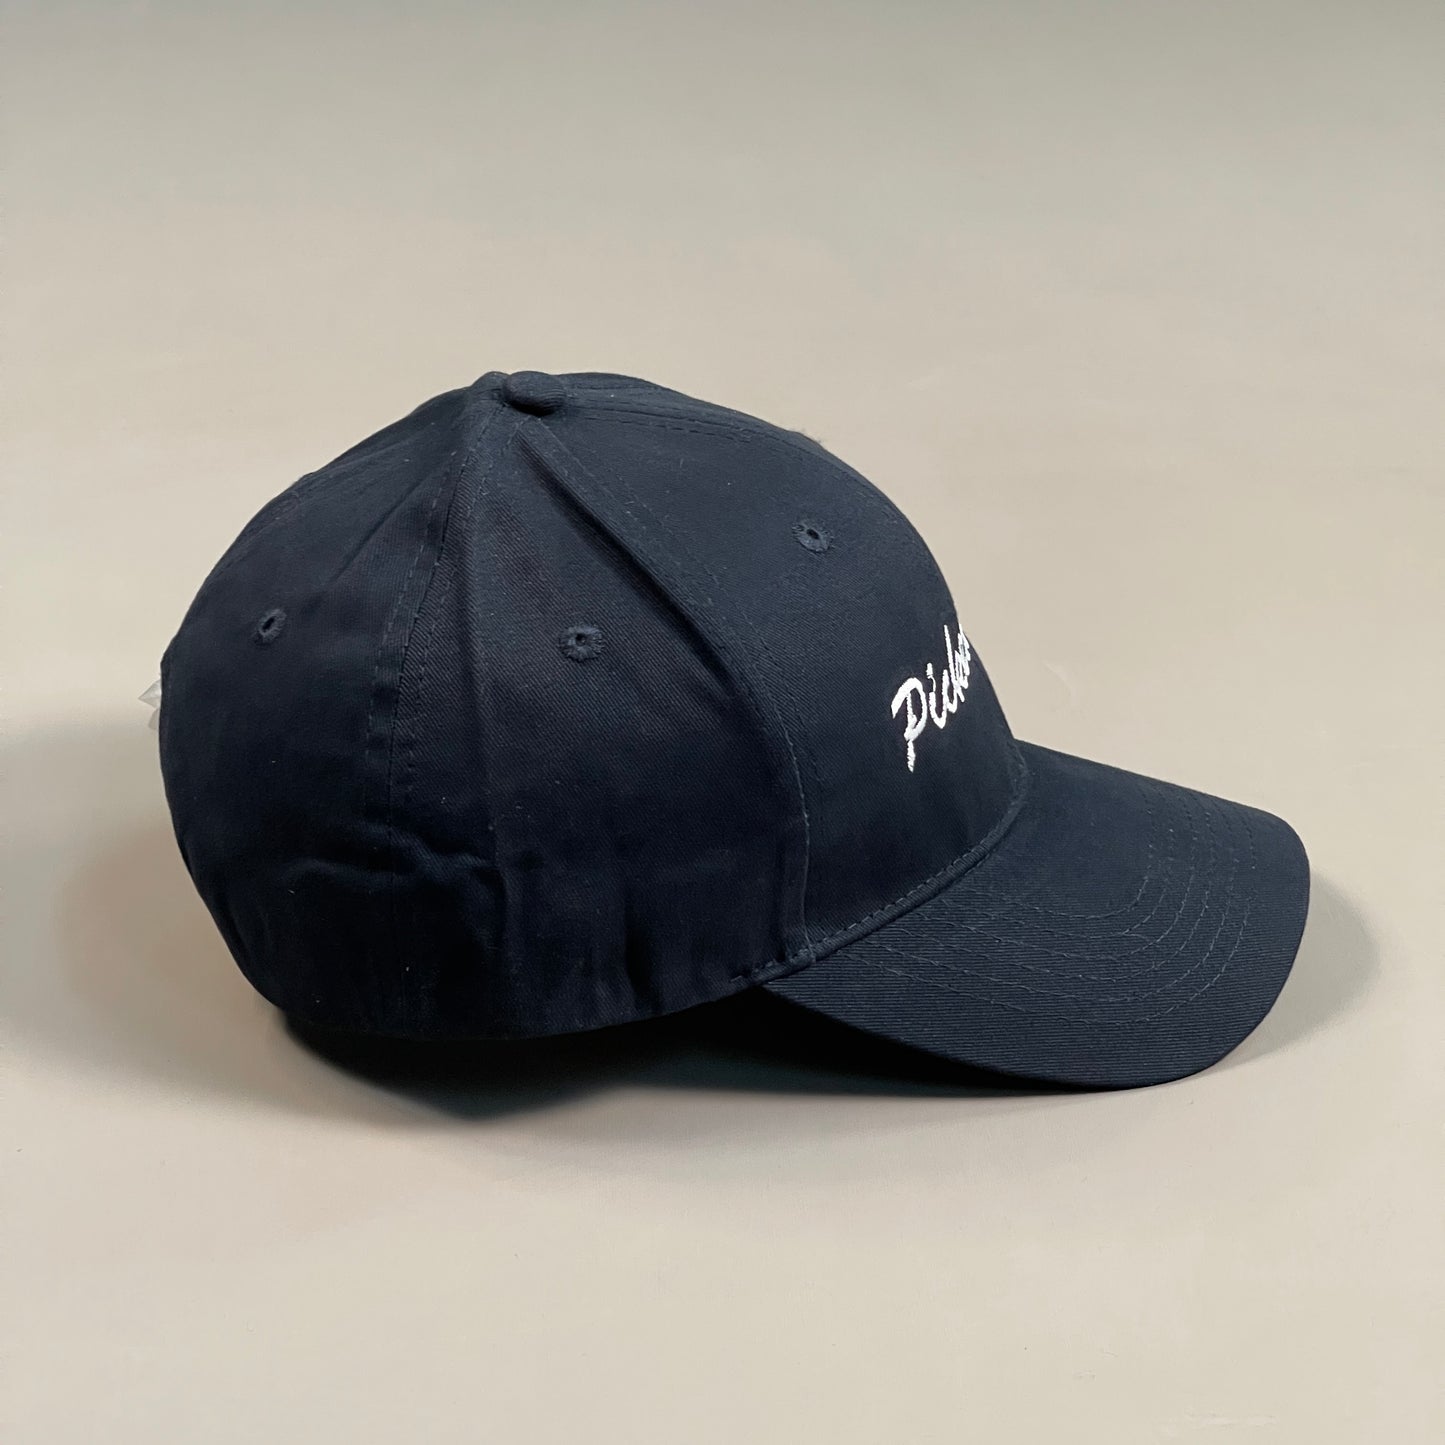 PACIFIC HEADWEAR 101C Cap "Pickett's Inc" Logo Adjustable Blue Embroidered Hat (New)